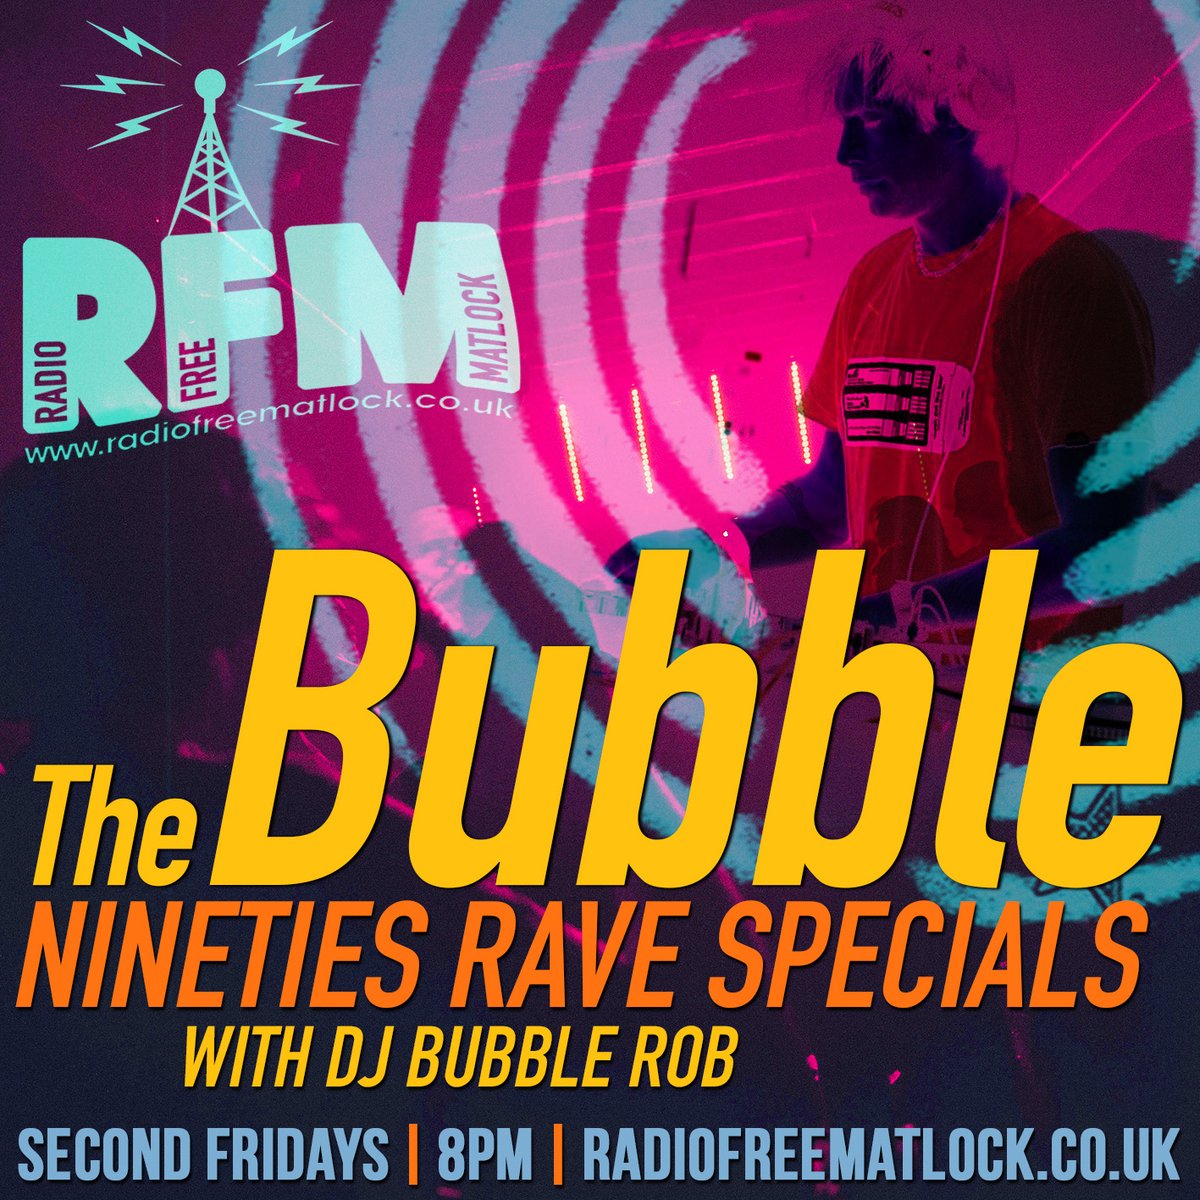 🔥 Strap in, it's a massive night on RFM with these two now back-to-back! From 7pm: it's @rcoyle77 from Unity Underground with Journey in the Jungle - massive beats and mixes! From 8pm: @bubblerob brings you the first part of his 90s rave specials 👂radiofreematlock.co.uk